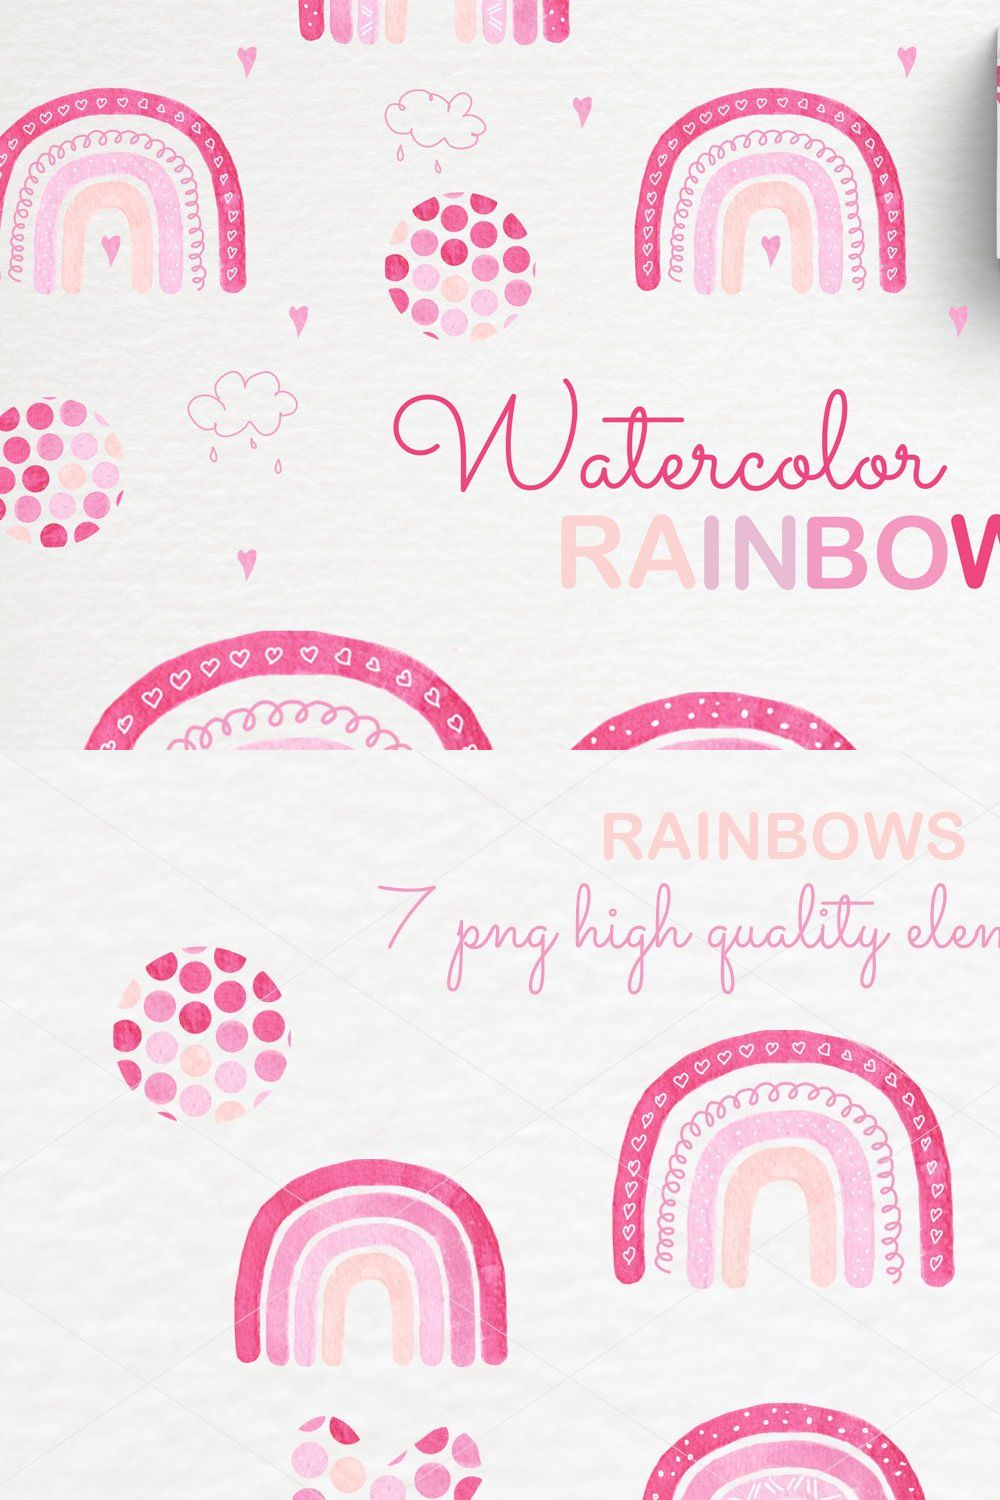 Watercolor rainbow clipart patterns pinterest preview image.